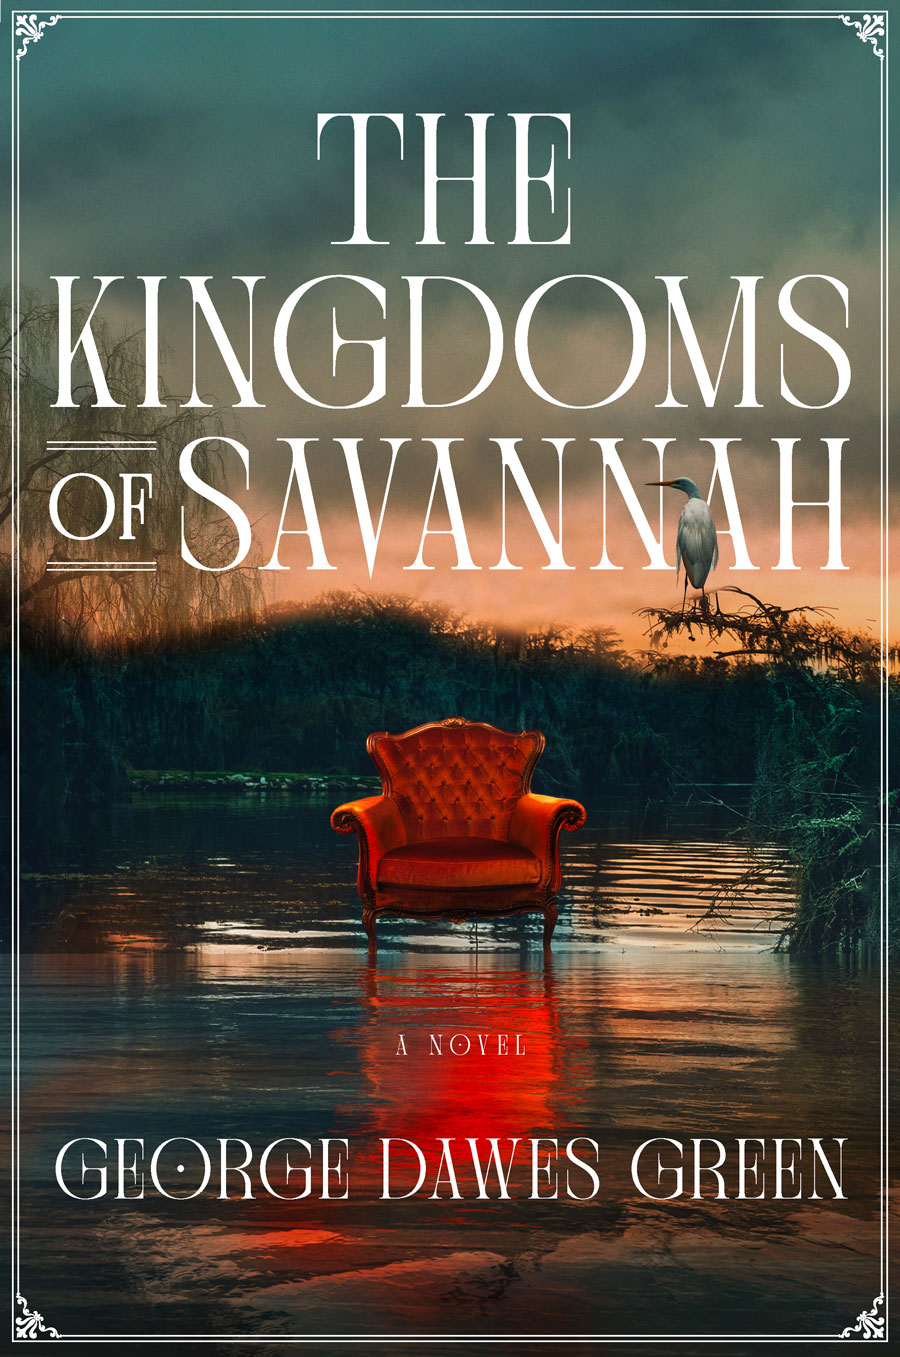 Front book cover of "The Kingdoms of Savannah" by George Dawes Green. The white font is in all capital letter. At the center of the image is a bright red velvet armchair sitting in the water of an eerie, dark swamp with storm clouds overhead as the sun sets.